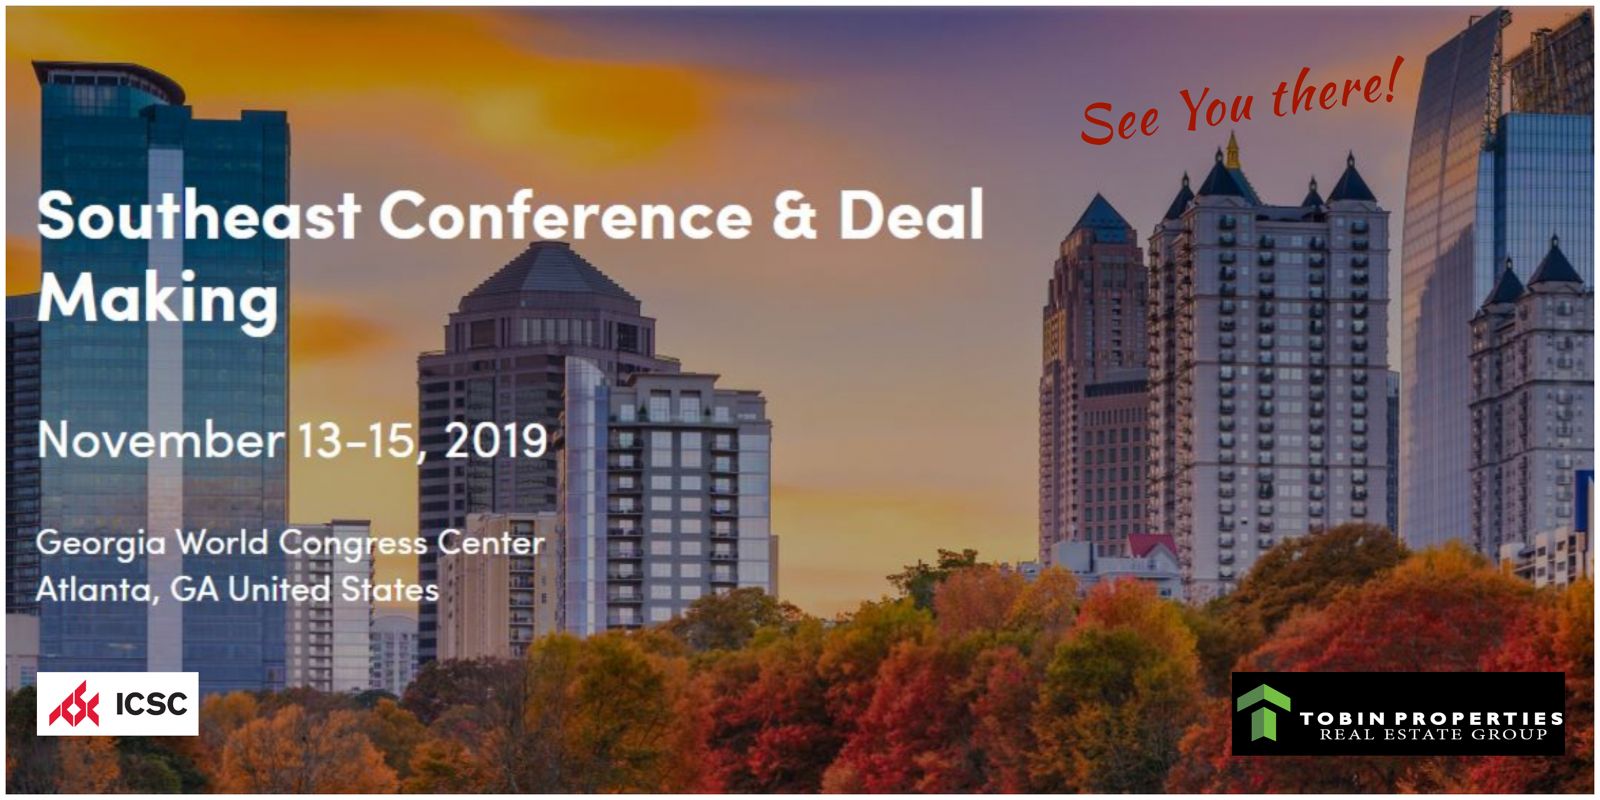 image of Tobin Properties Real Estate Group at the ICSC ATLANTA CONFERENCE & DEAL MAKING 2019 (Nov 13 - 15) to continue our commitment in the Industry. We encourage Principles, Clients, and Prospects to schedule an appointment to meet with us at the convention. Send us an email: info@tobinprop.com. See you in Atlanta!